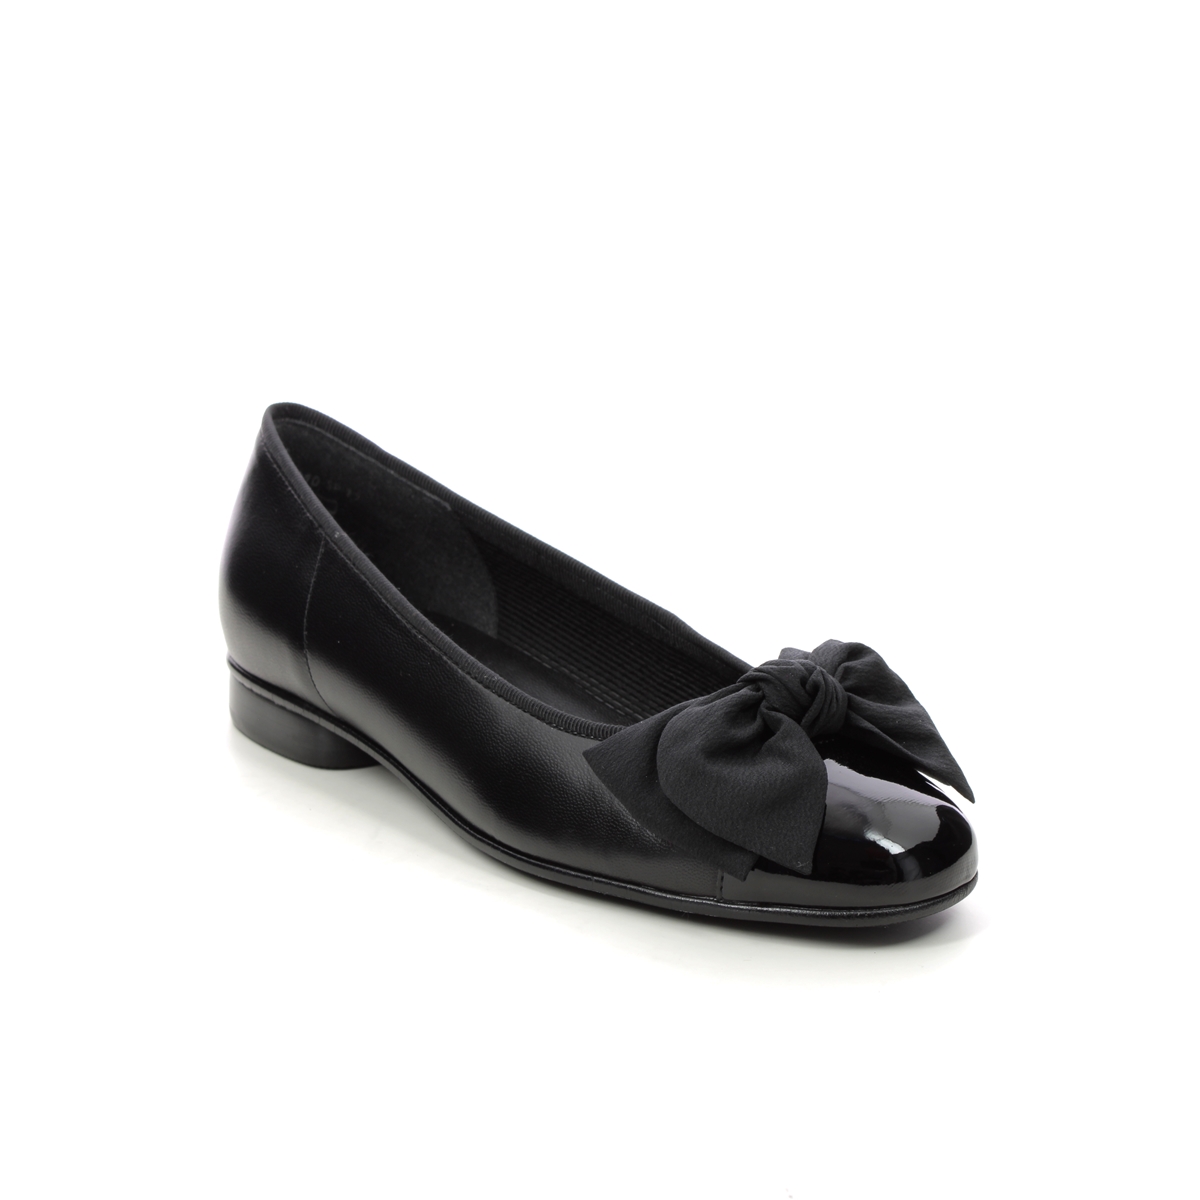 Gabor Amy Black leather Womens pumps 05.106.37 in a Plain Leather and Man-made in Size 7